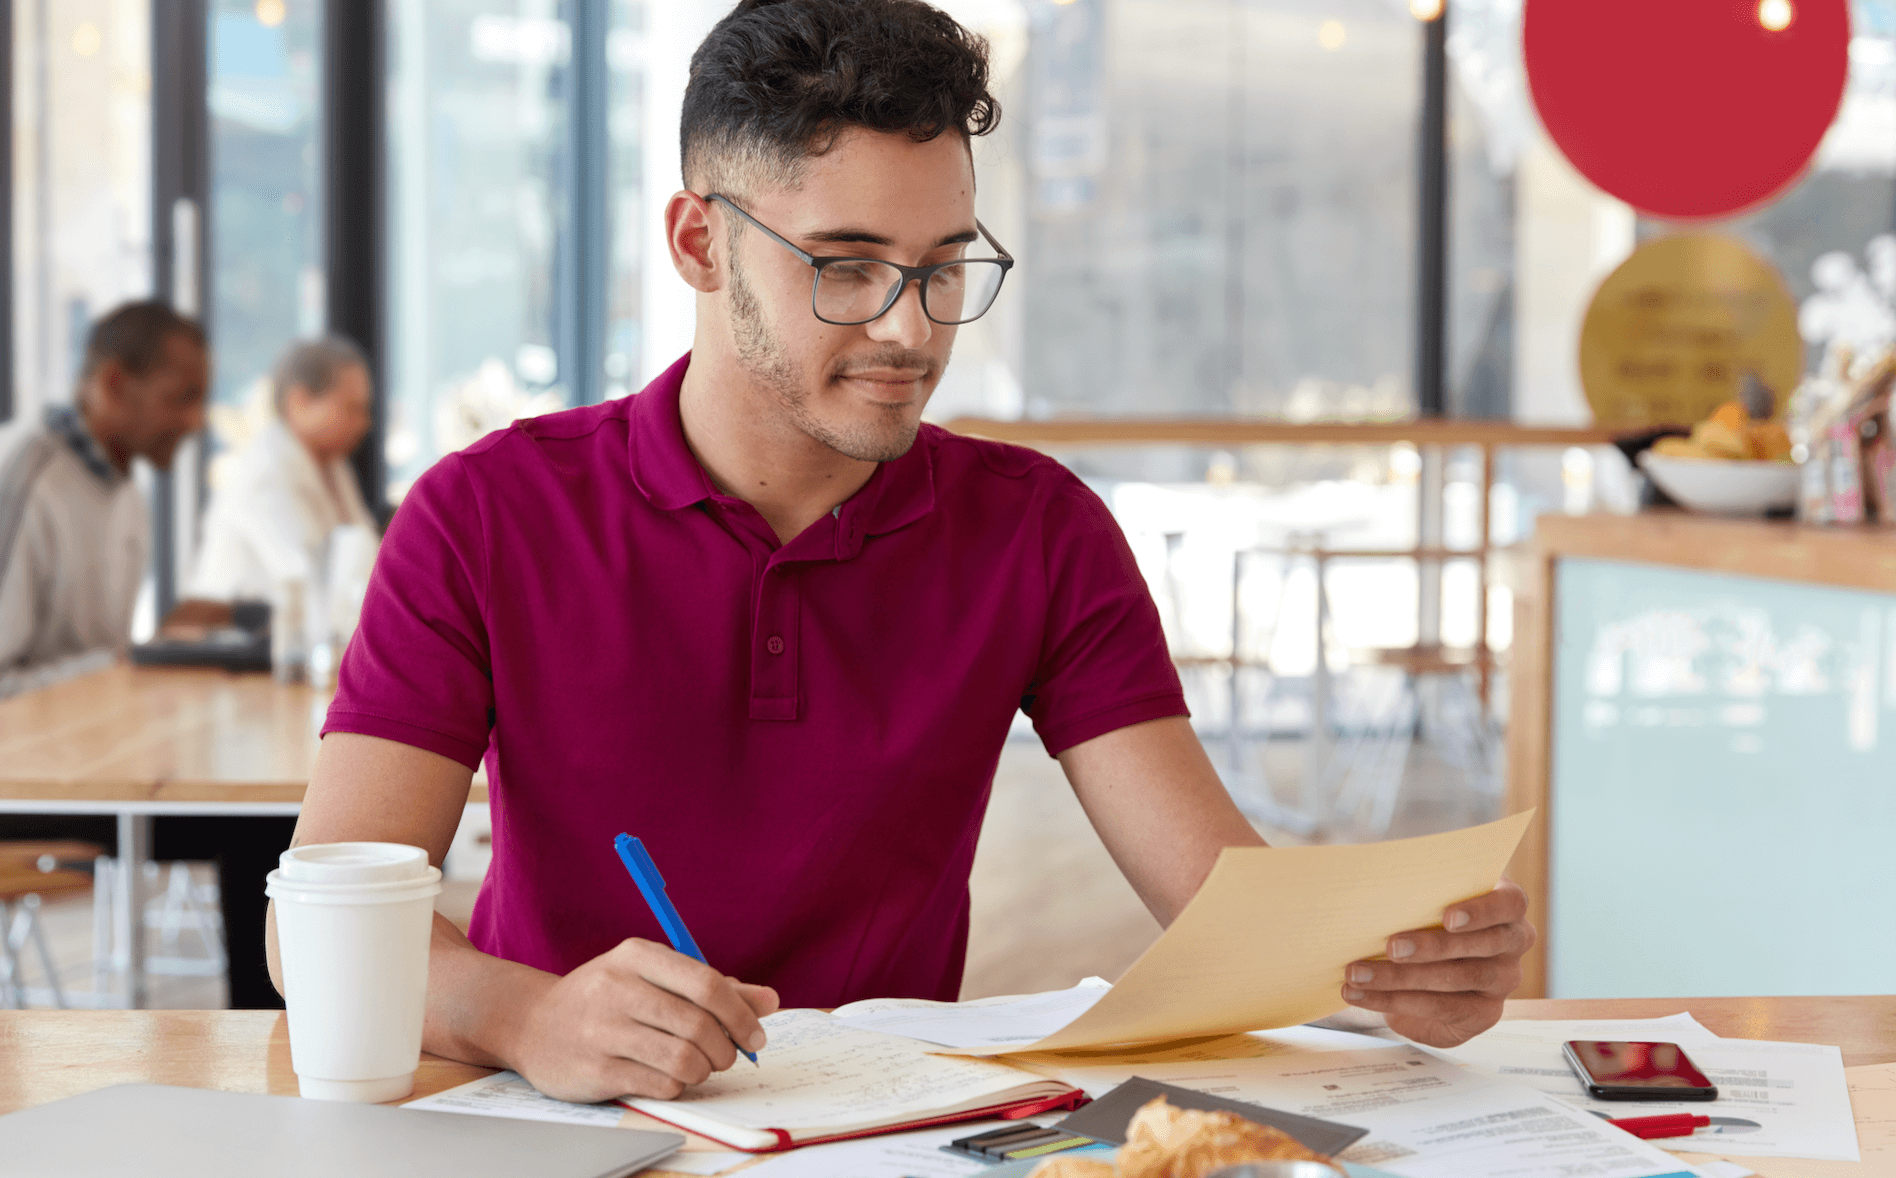 6 Tips For Writing College Application Essay